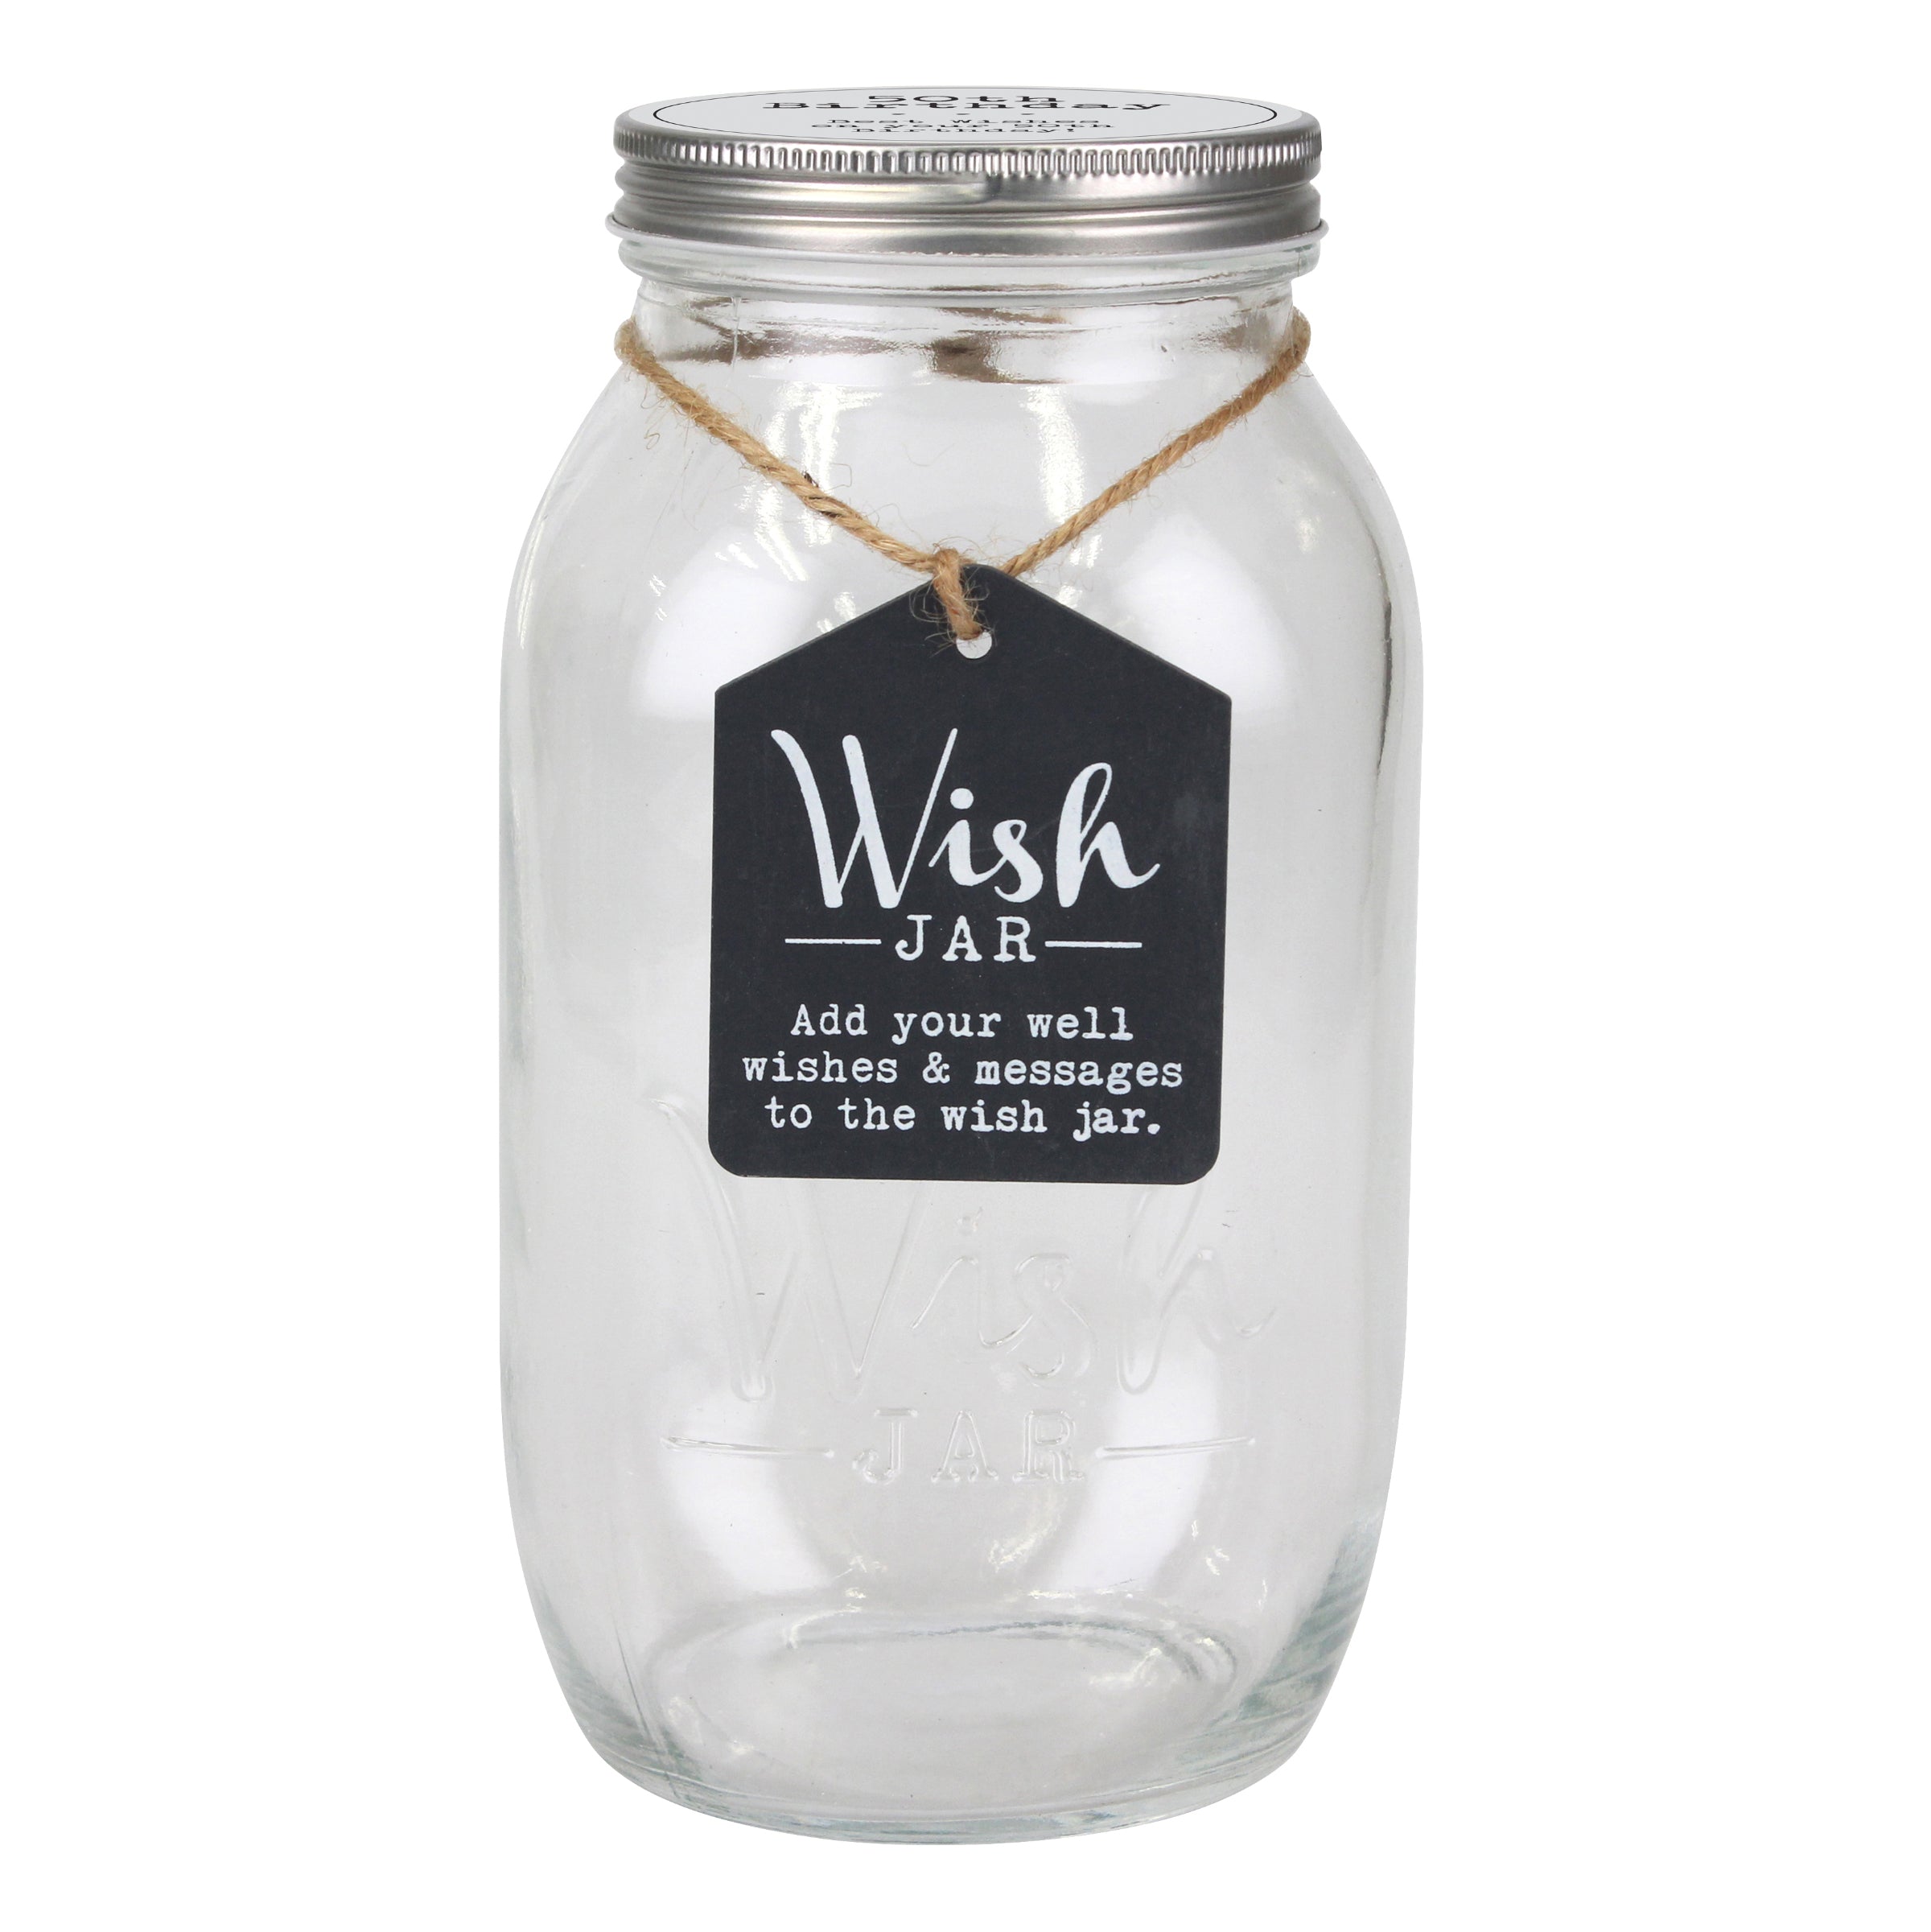 Top Shelf 50th Birthday Wish Jar With 100 Tickets, Pen, and Decorative Lid